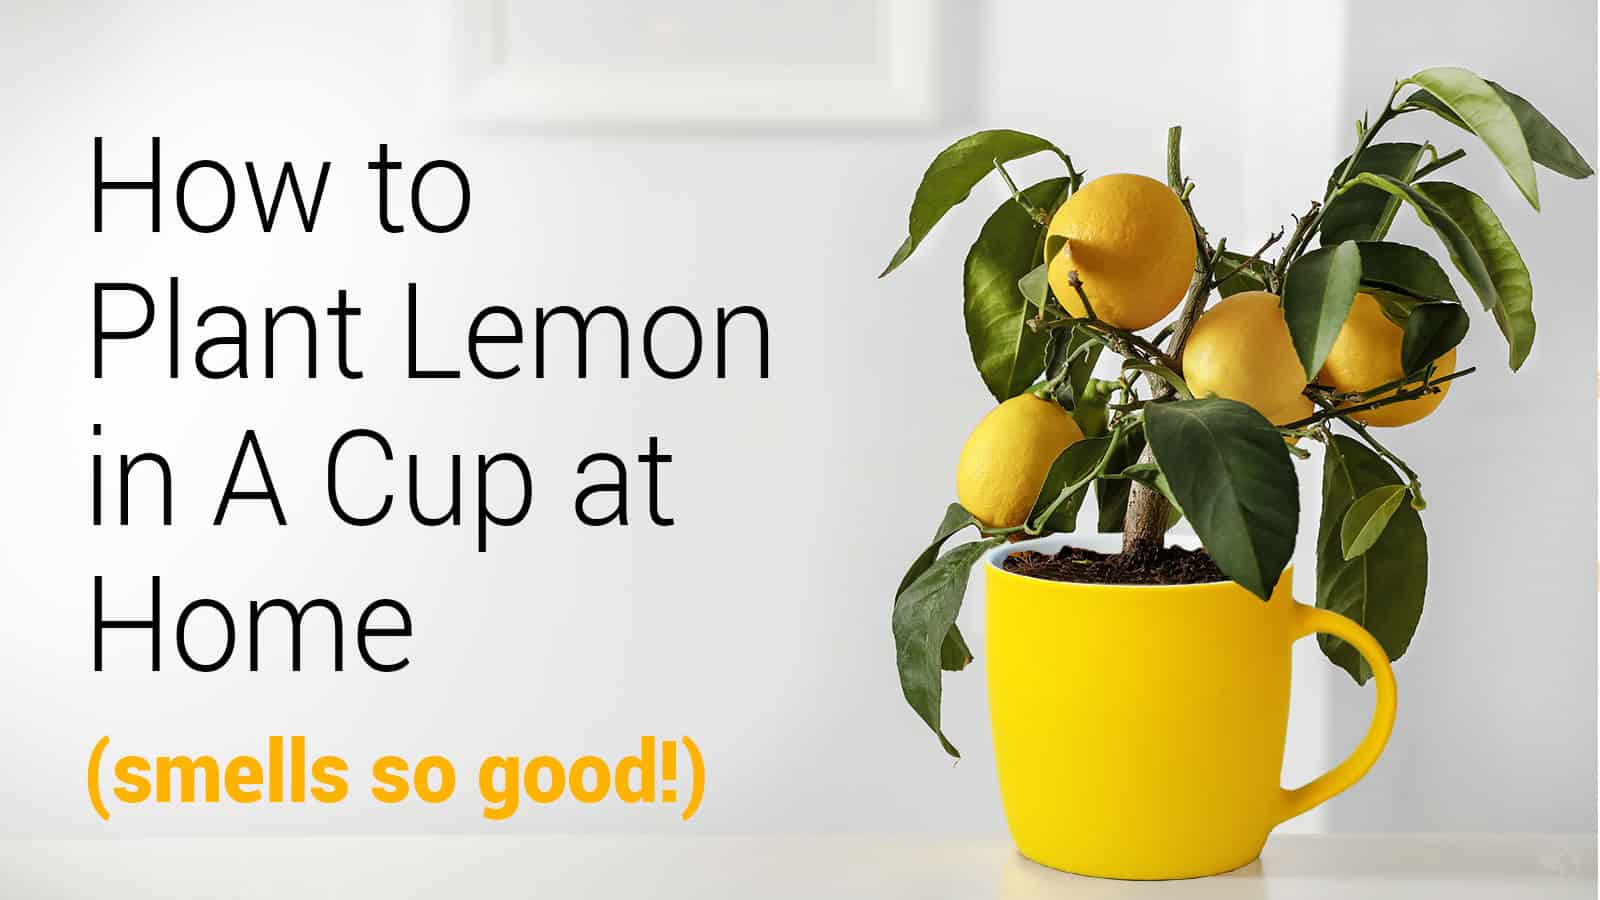 How-to-Plant-Lemon-in-A-Cup-at-Home-smells-so-good.jpg